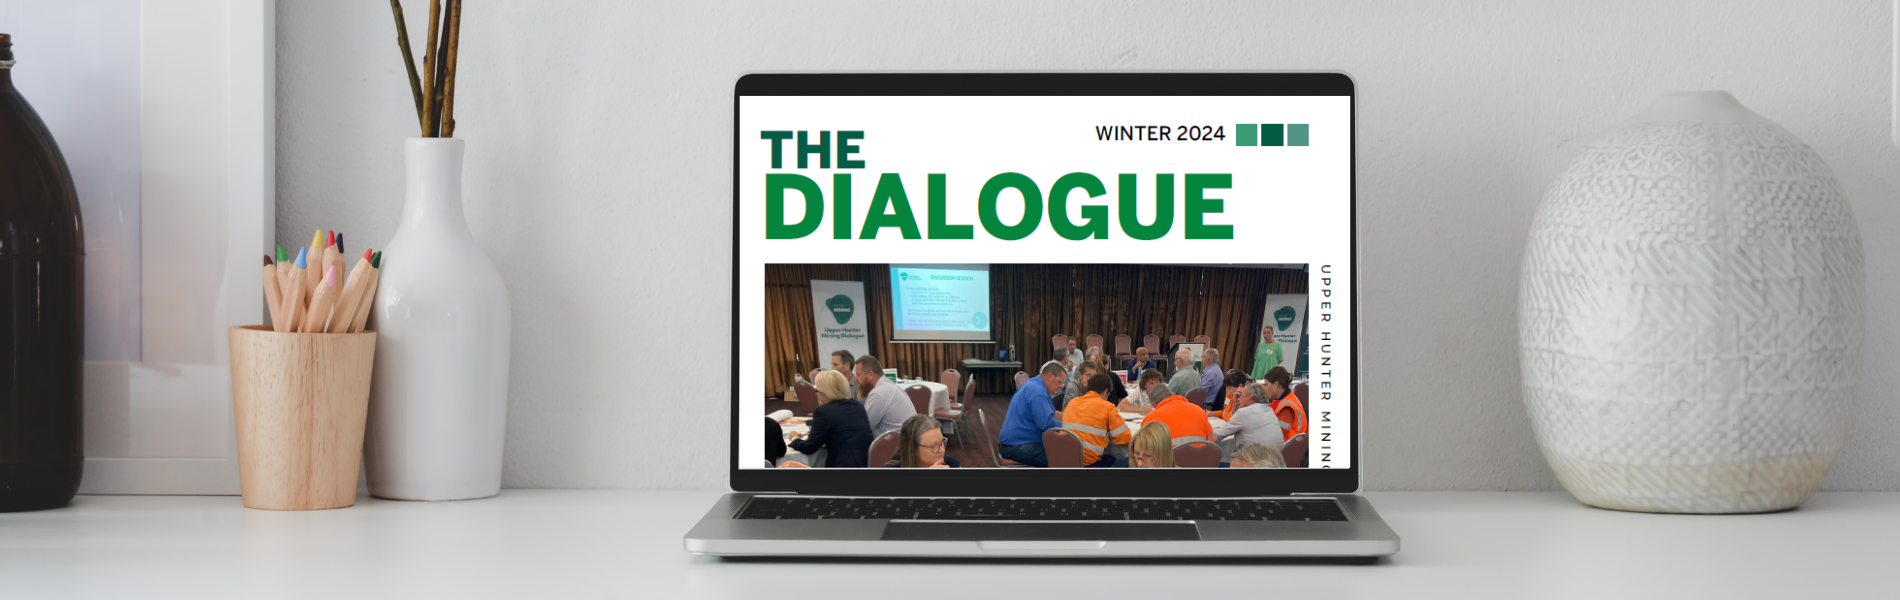 A busy start to 2024: Catch up with the Dialogue’s latest in our Winter 2024 Newsletter!